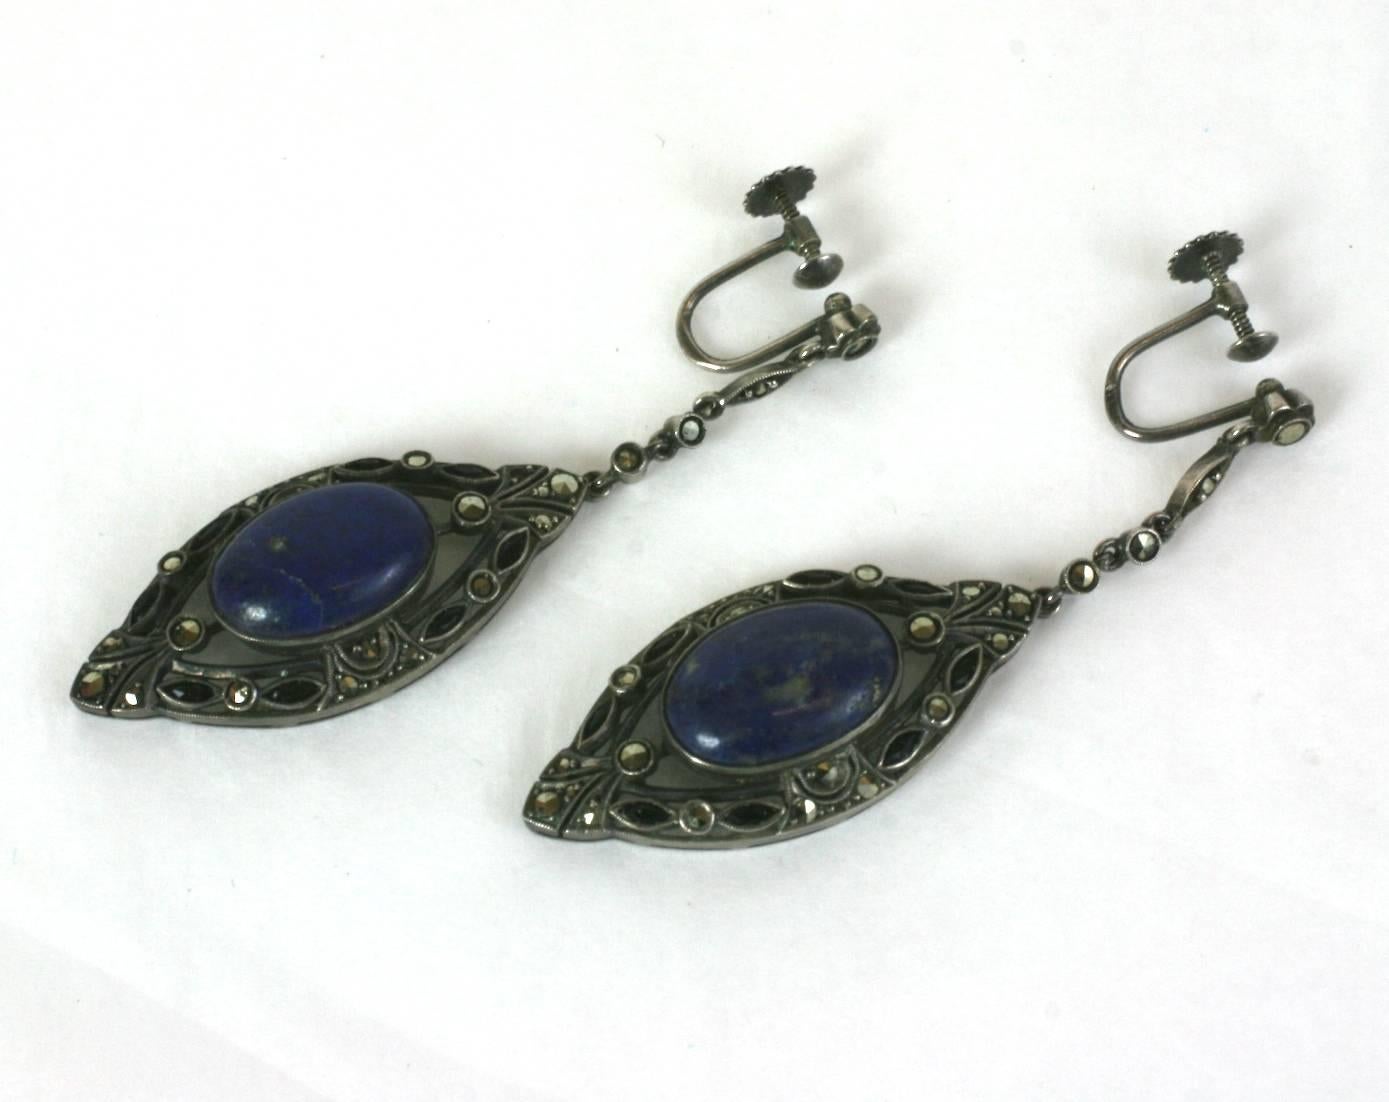 Art Deco Marcasite, Sodalite and Onyx Drop Earrings set in sterling silver. Attractive onyx marquise shaped stones surround the central sodalite  cabochon with marcasites set around. Sodalite has the look of Lapis lazuli without the gold veining.